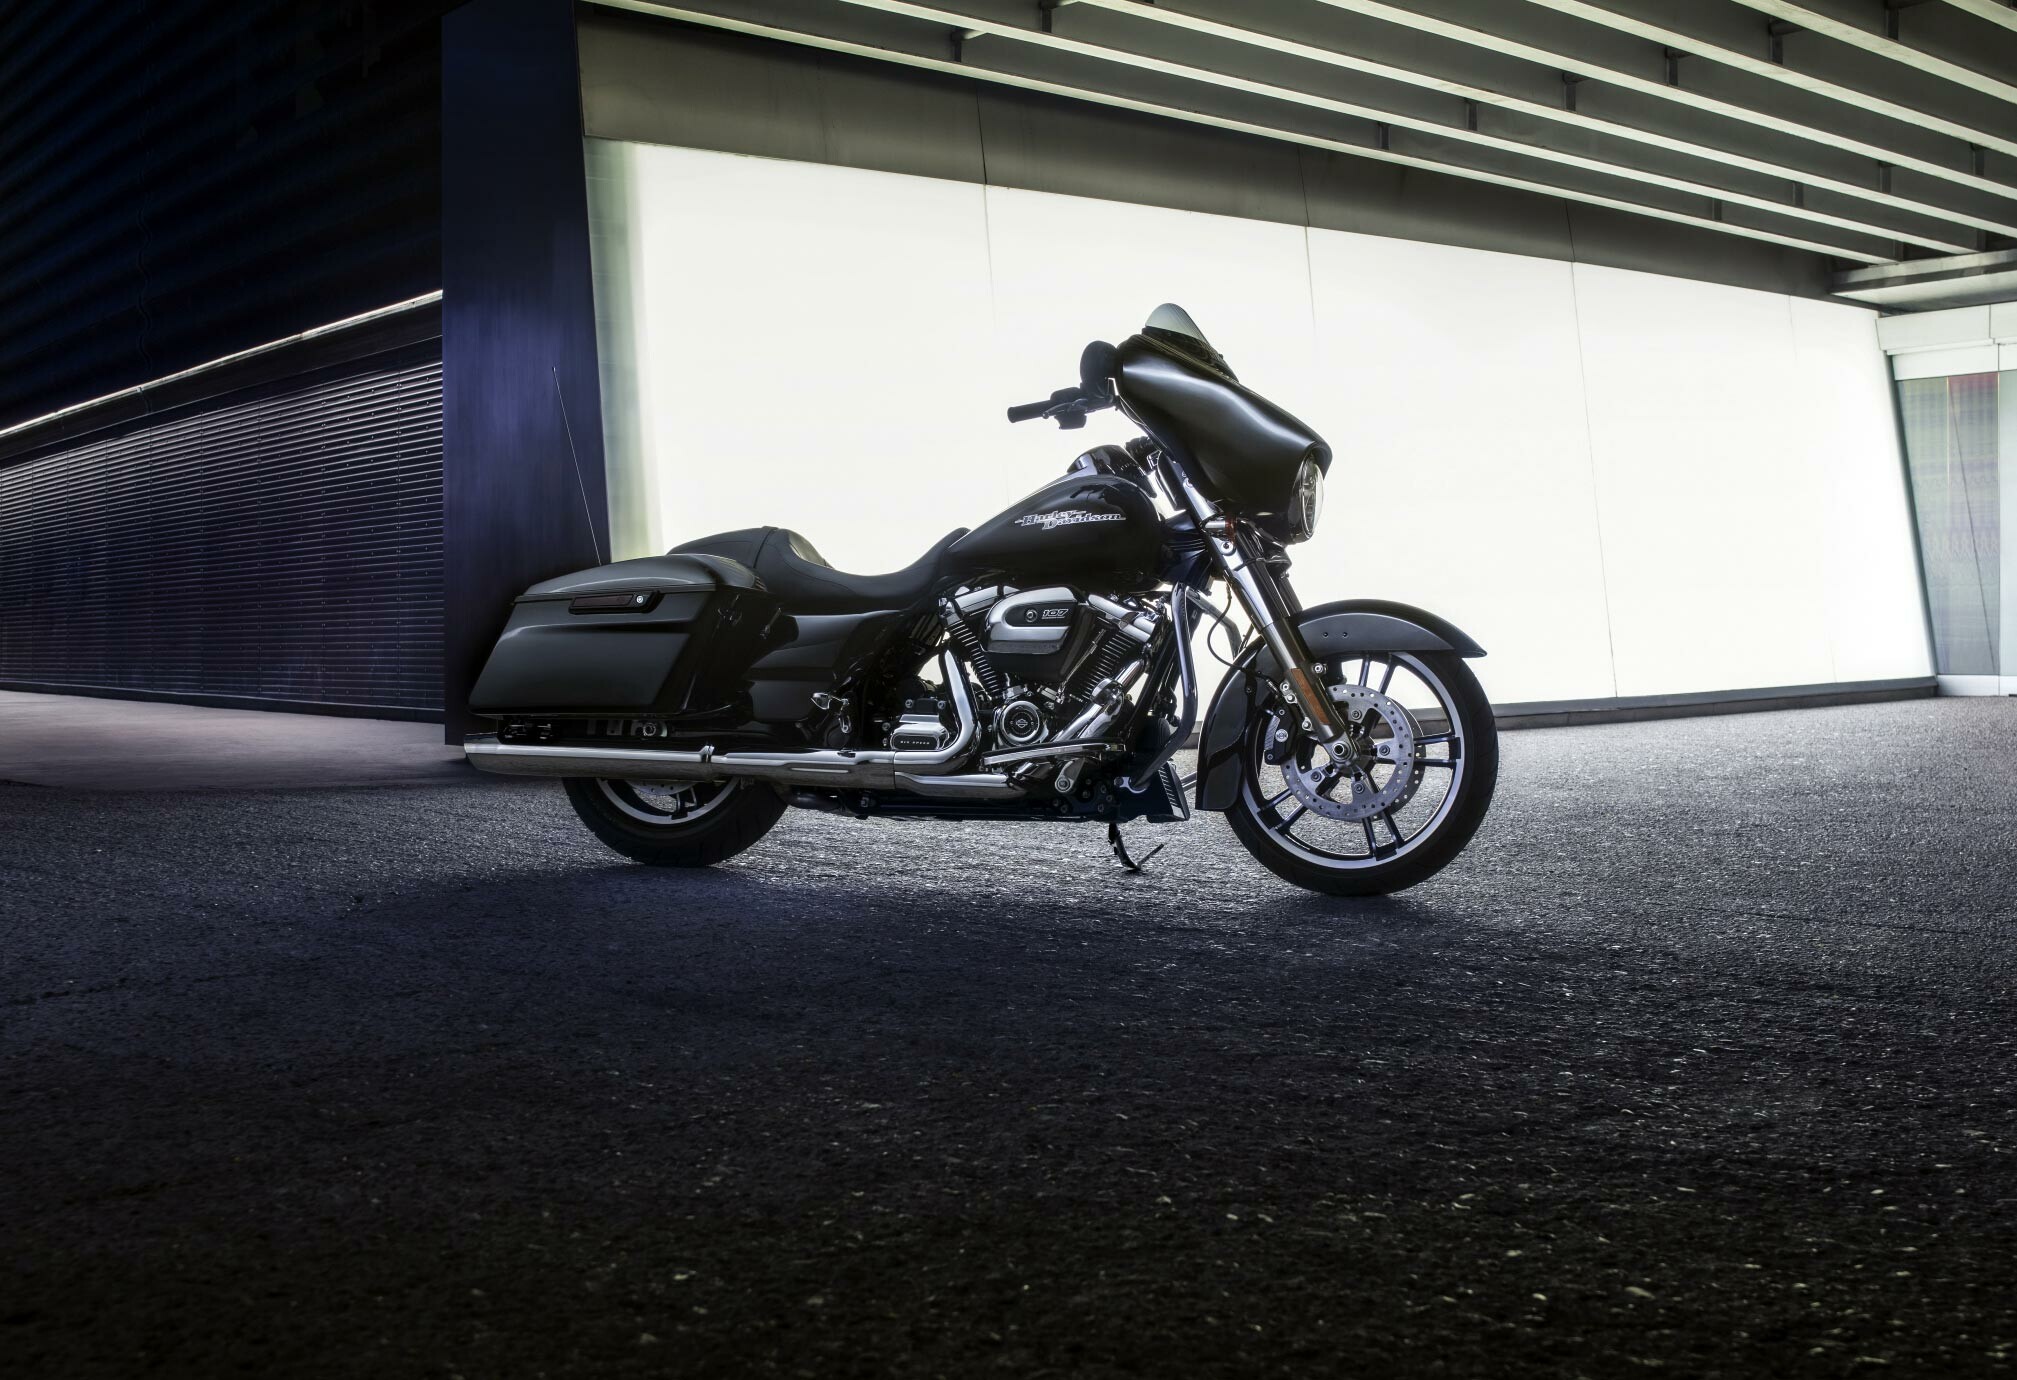 Harley-Davidson Glide: Touring model, Features Harman/Kardon sound system, cruise control, and optional ABS and security. 2020x1380 HD Wallpaper.